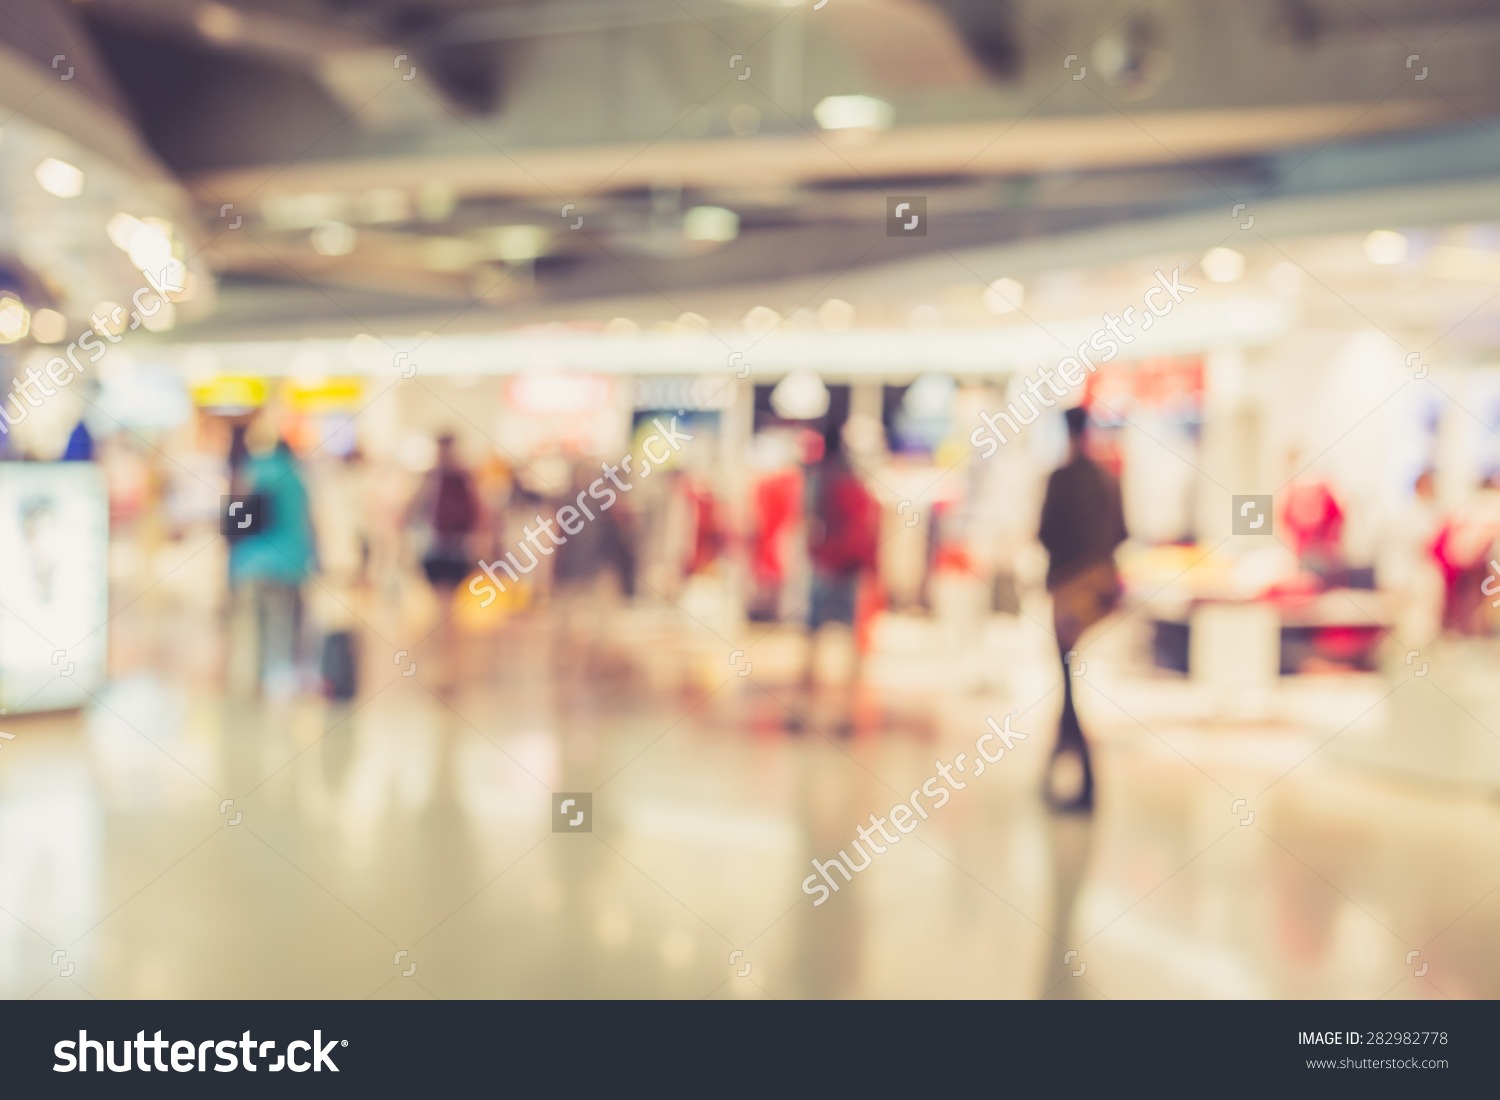 stock-photo-blurred-image-of-people-in-shopping-mall-with-bokeh-vintage-color-282982778